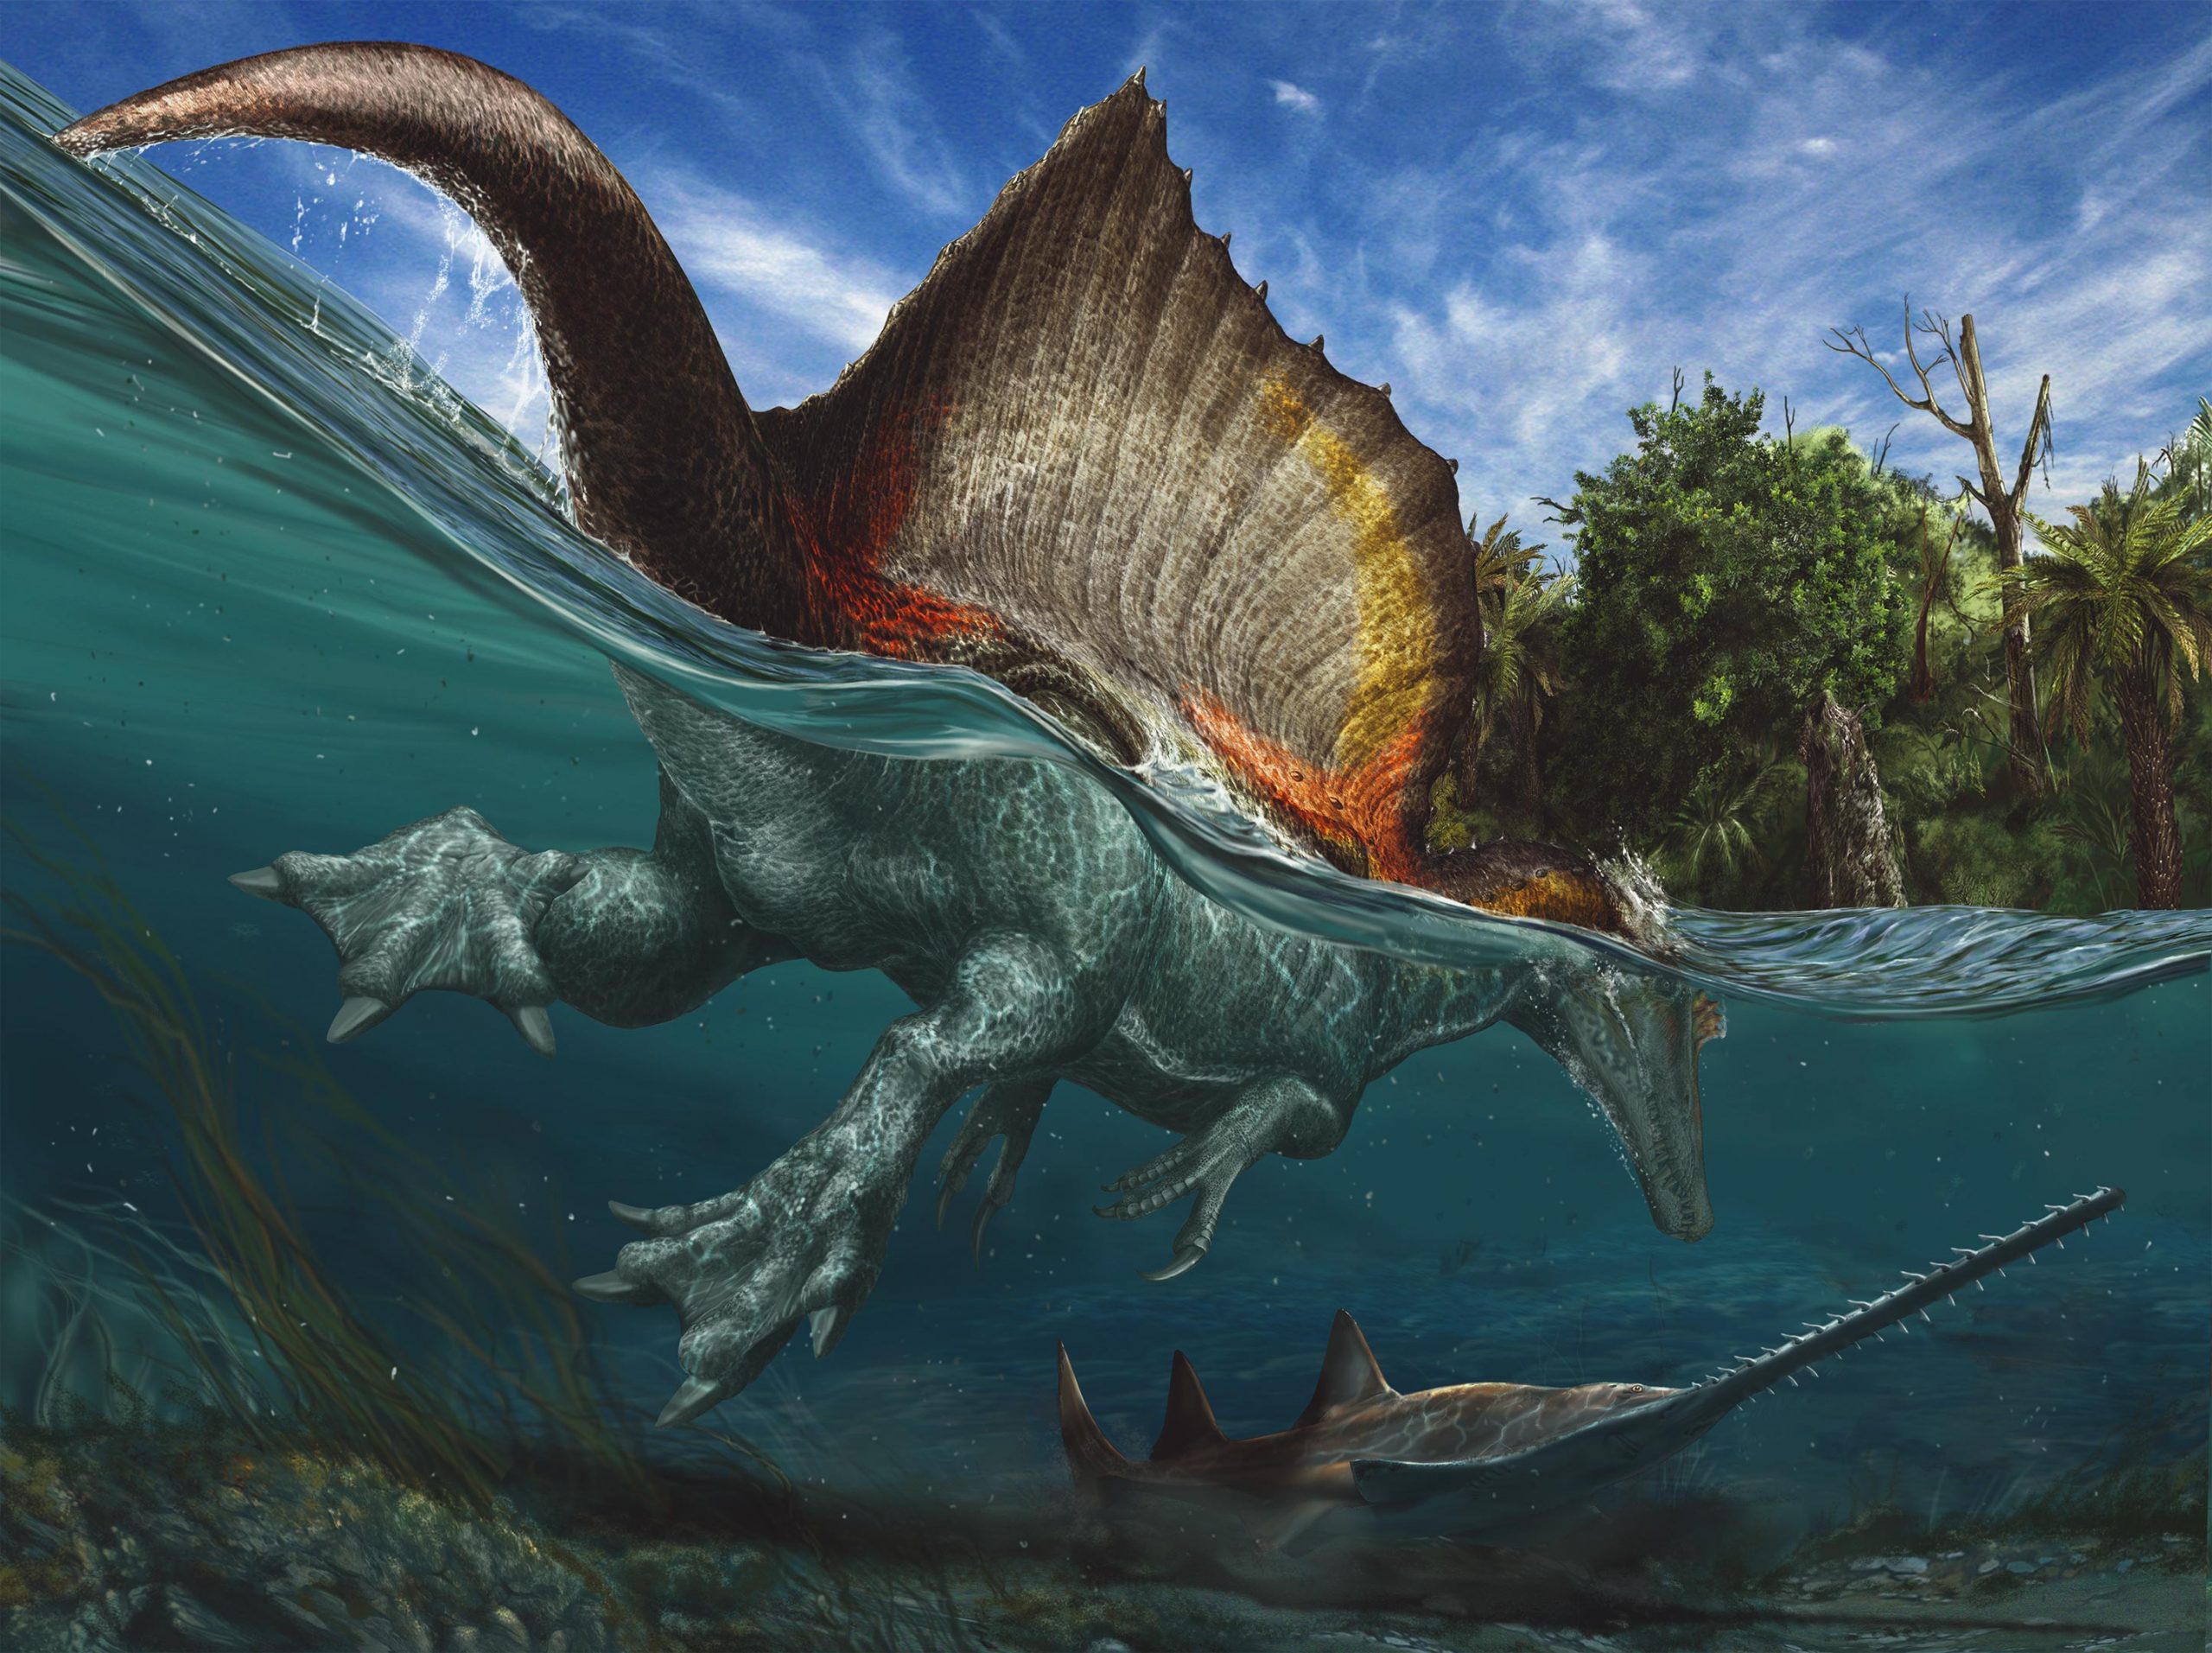 Paleontologists Reveal Jurassic Park in Eastern Morocco